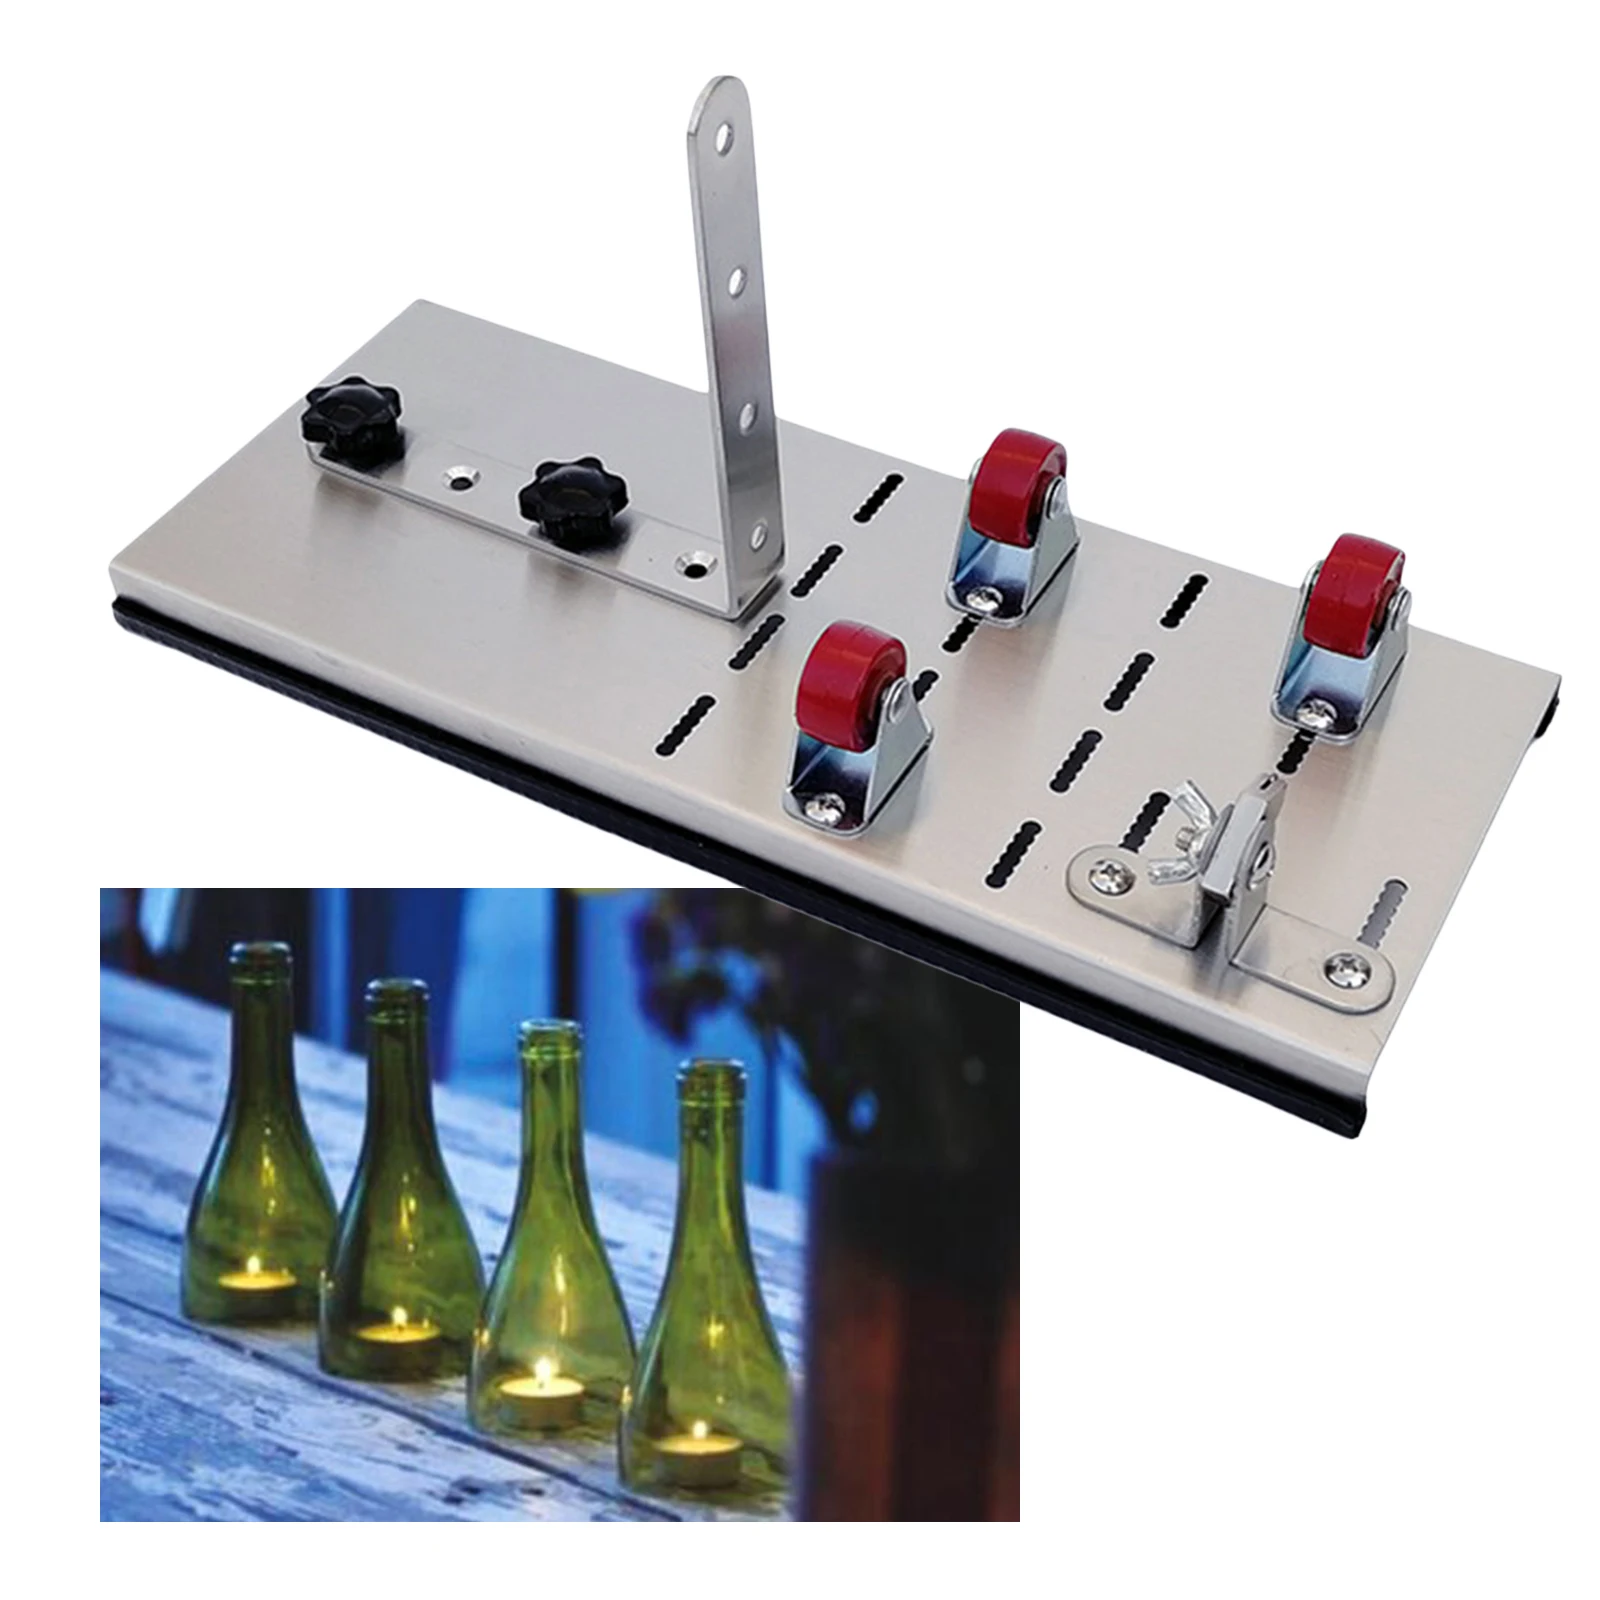 Professional Glass Bottle Cutter Adjustable Wine Cutting Tool for Home DIY Craft Liquor Recycle Wedding